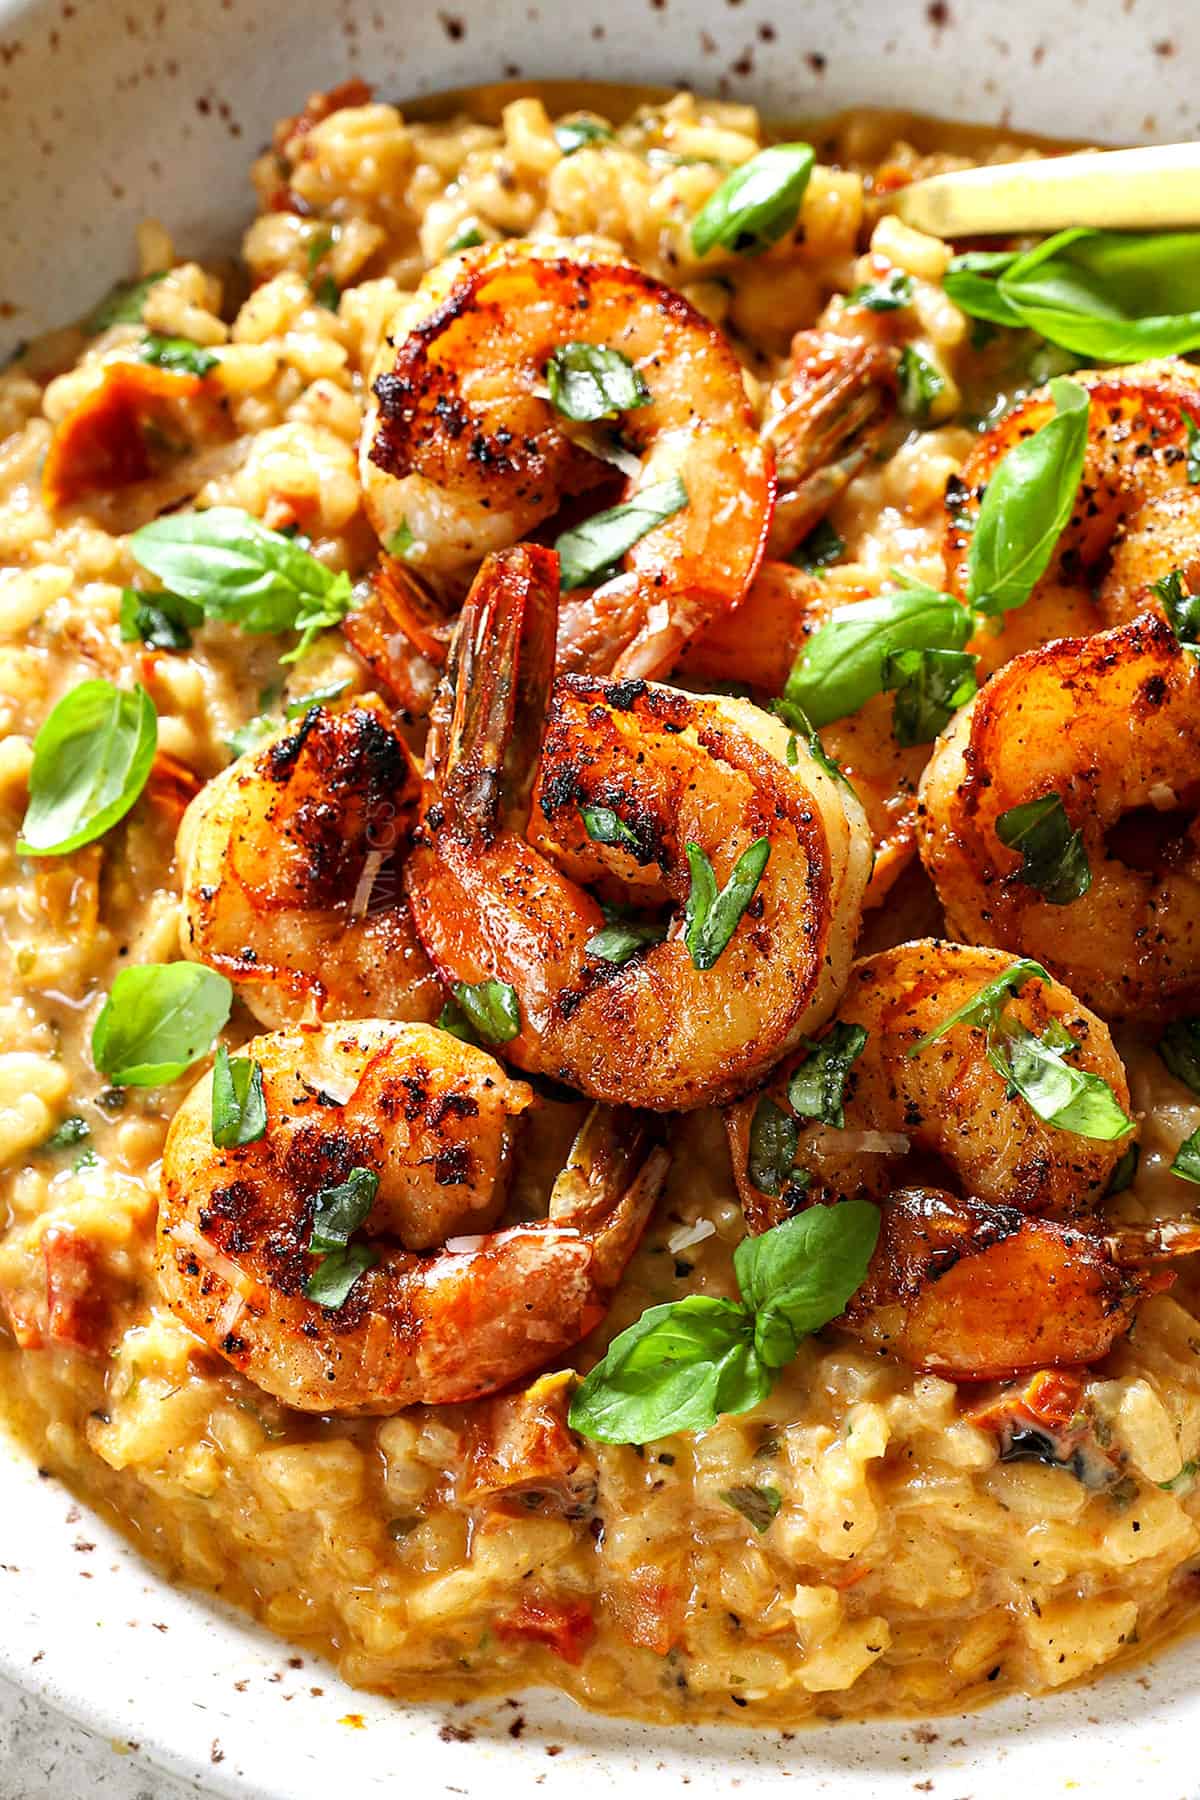 serving Italian shrimp risotto with creamy risotto and sautéed shrimp